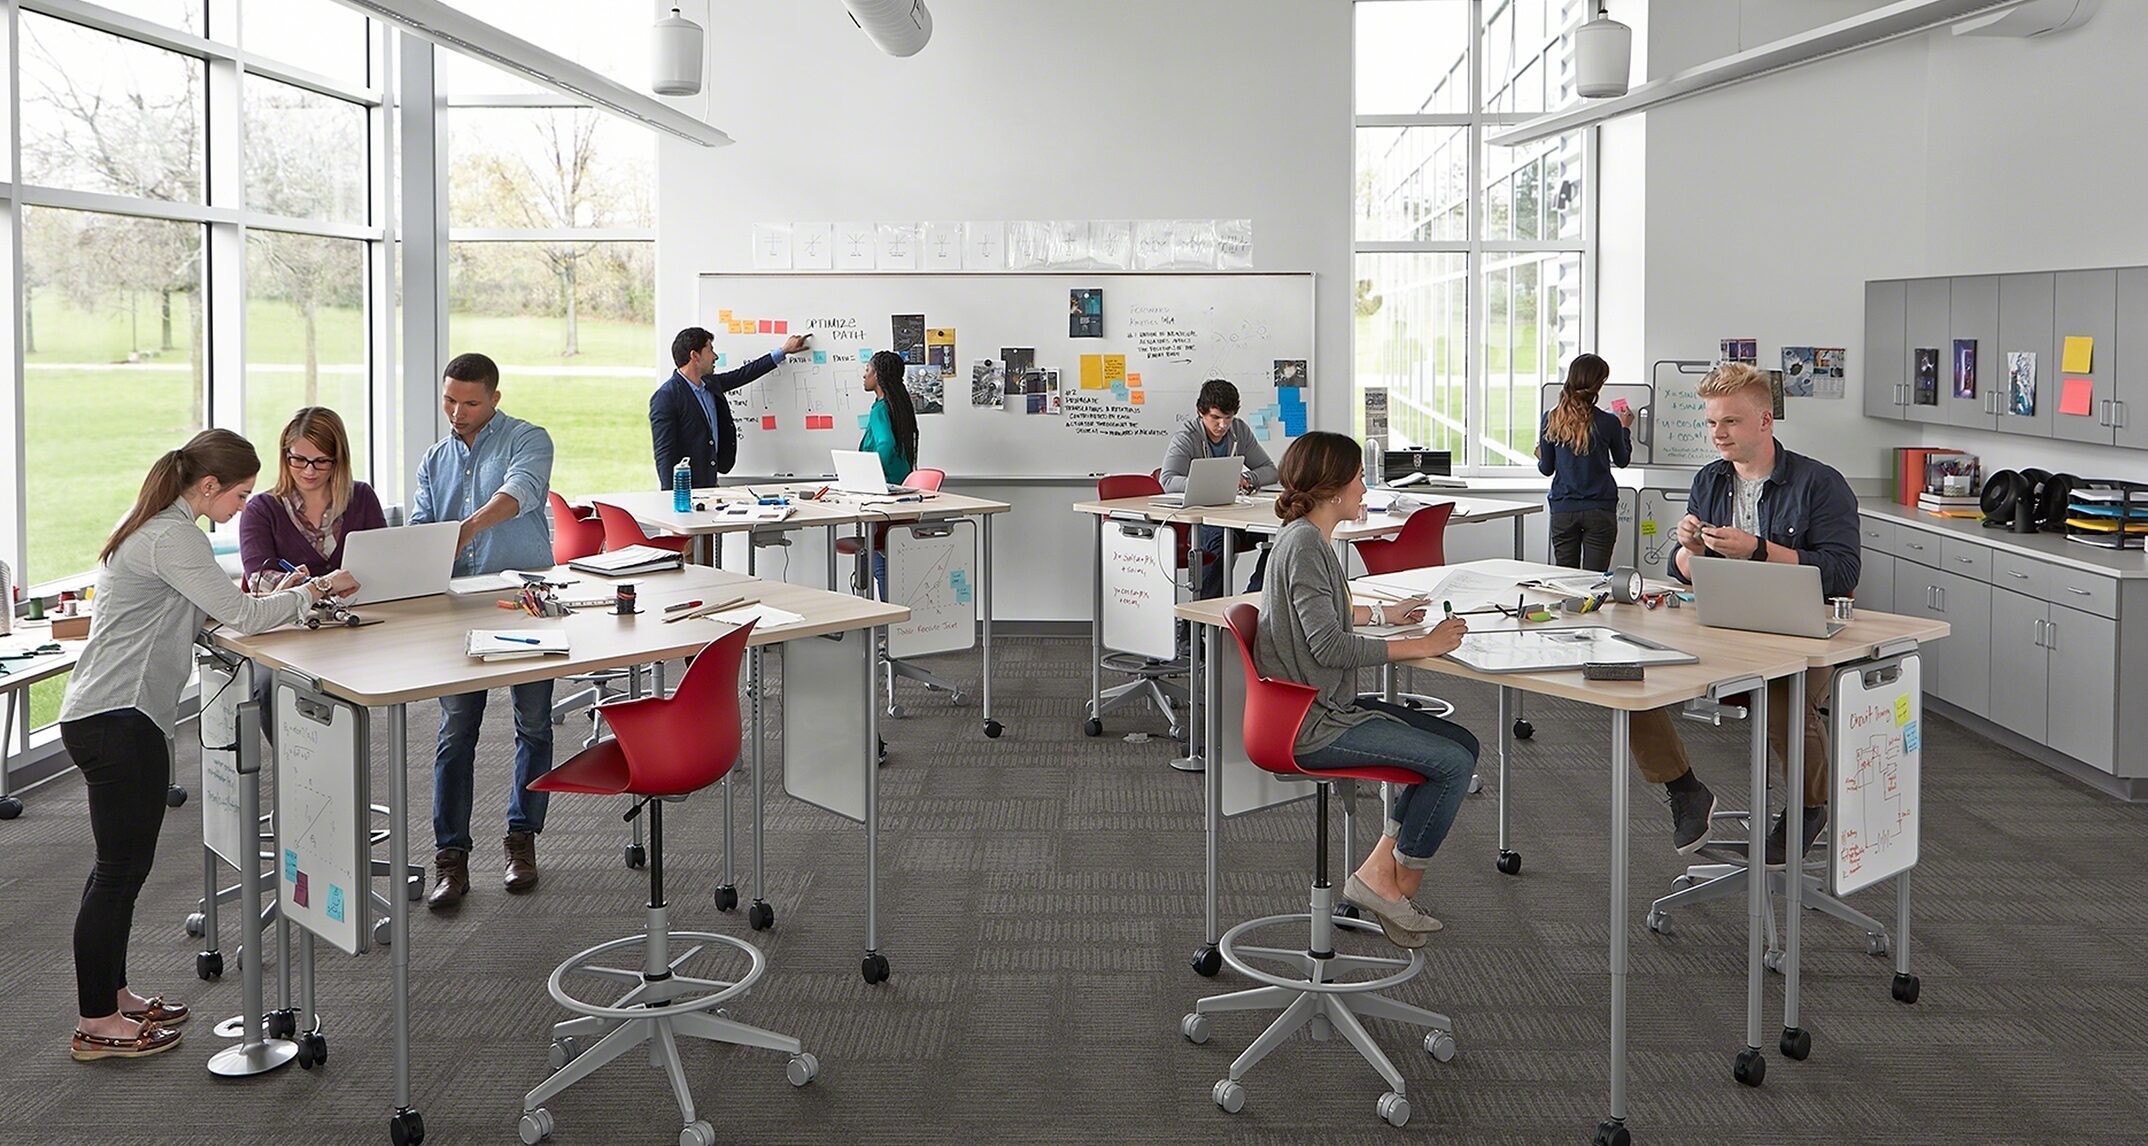 Taller desks give students the option to sit or stand, and facilitates easy movement and collaboration between groups. Image courtesy of Steelcase